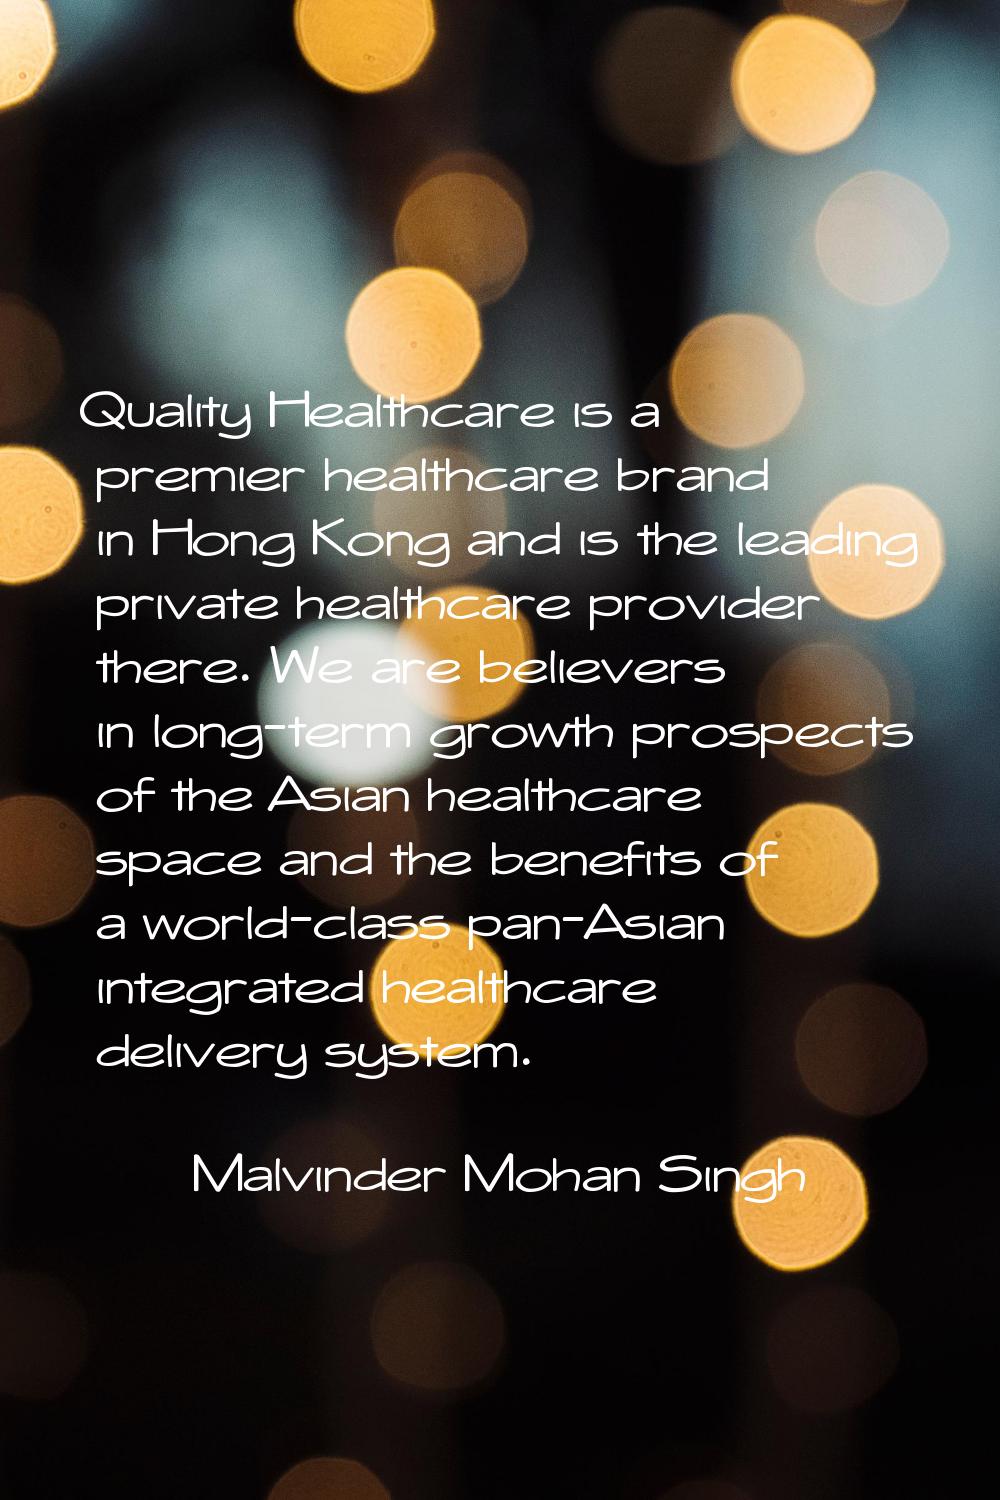 Quality Healthcare is a premier healthcare brand in Hong Kong and is the leading private healthcare